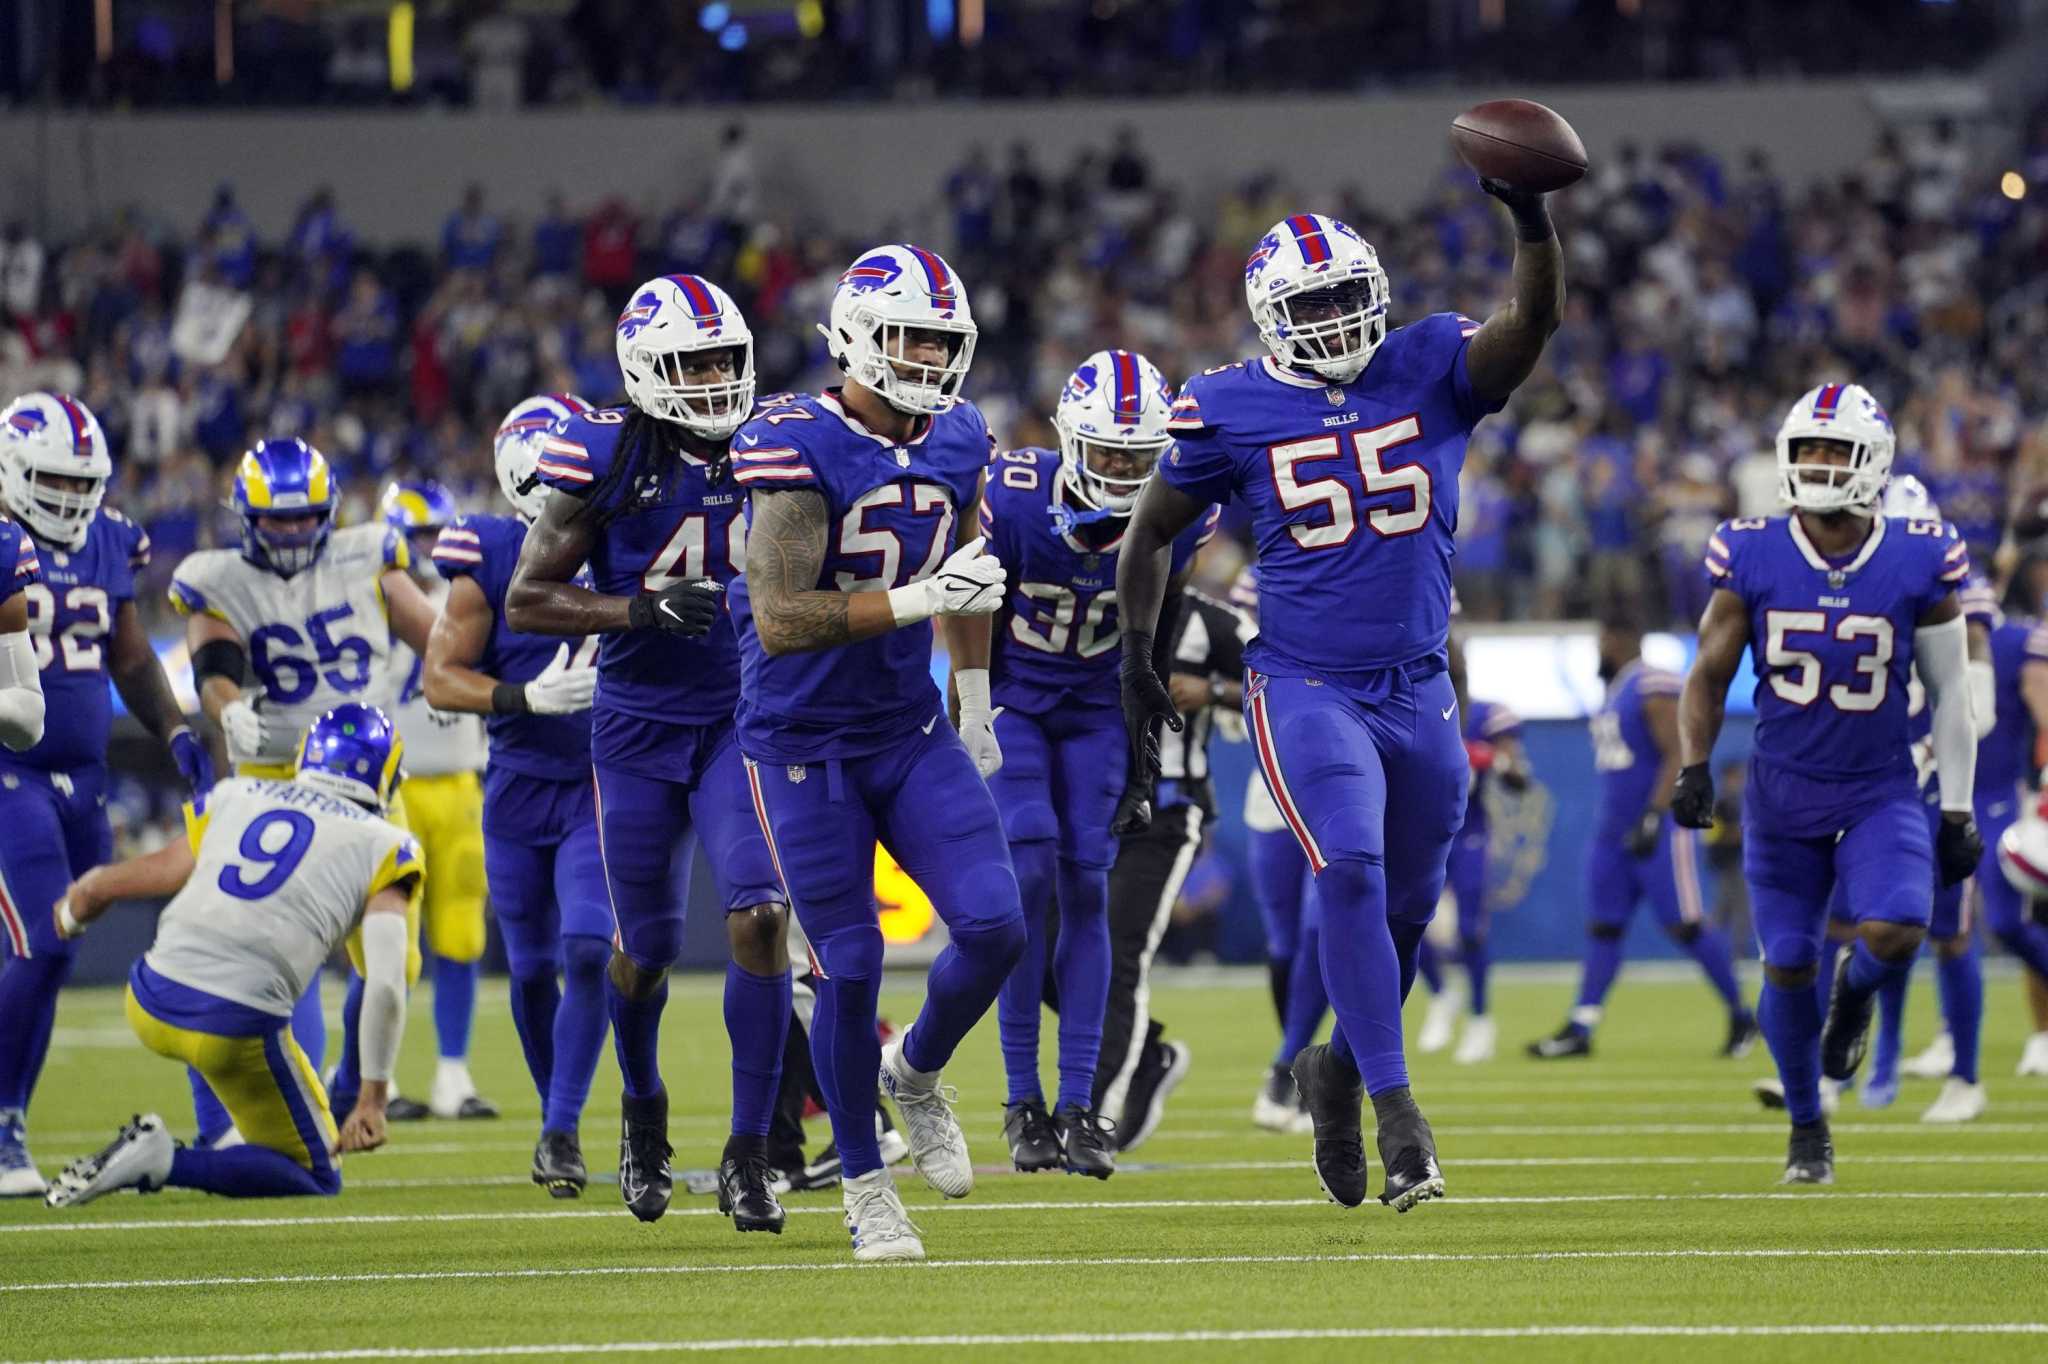 Reaction to Buffalo Bills blowout win over Los Angeles Rams in NFL opener